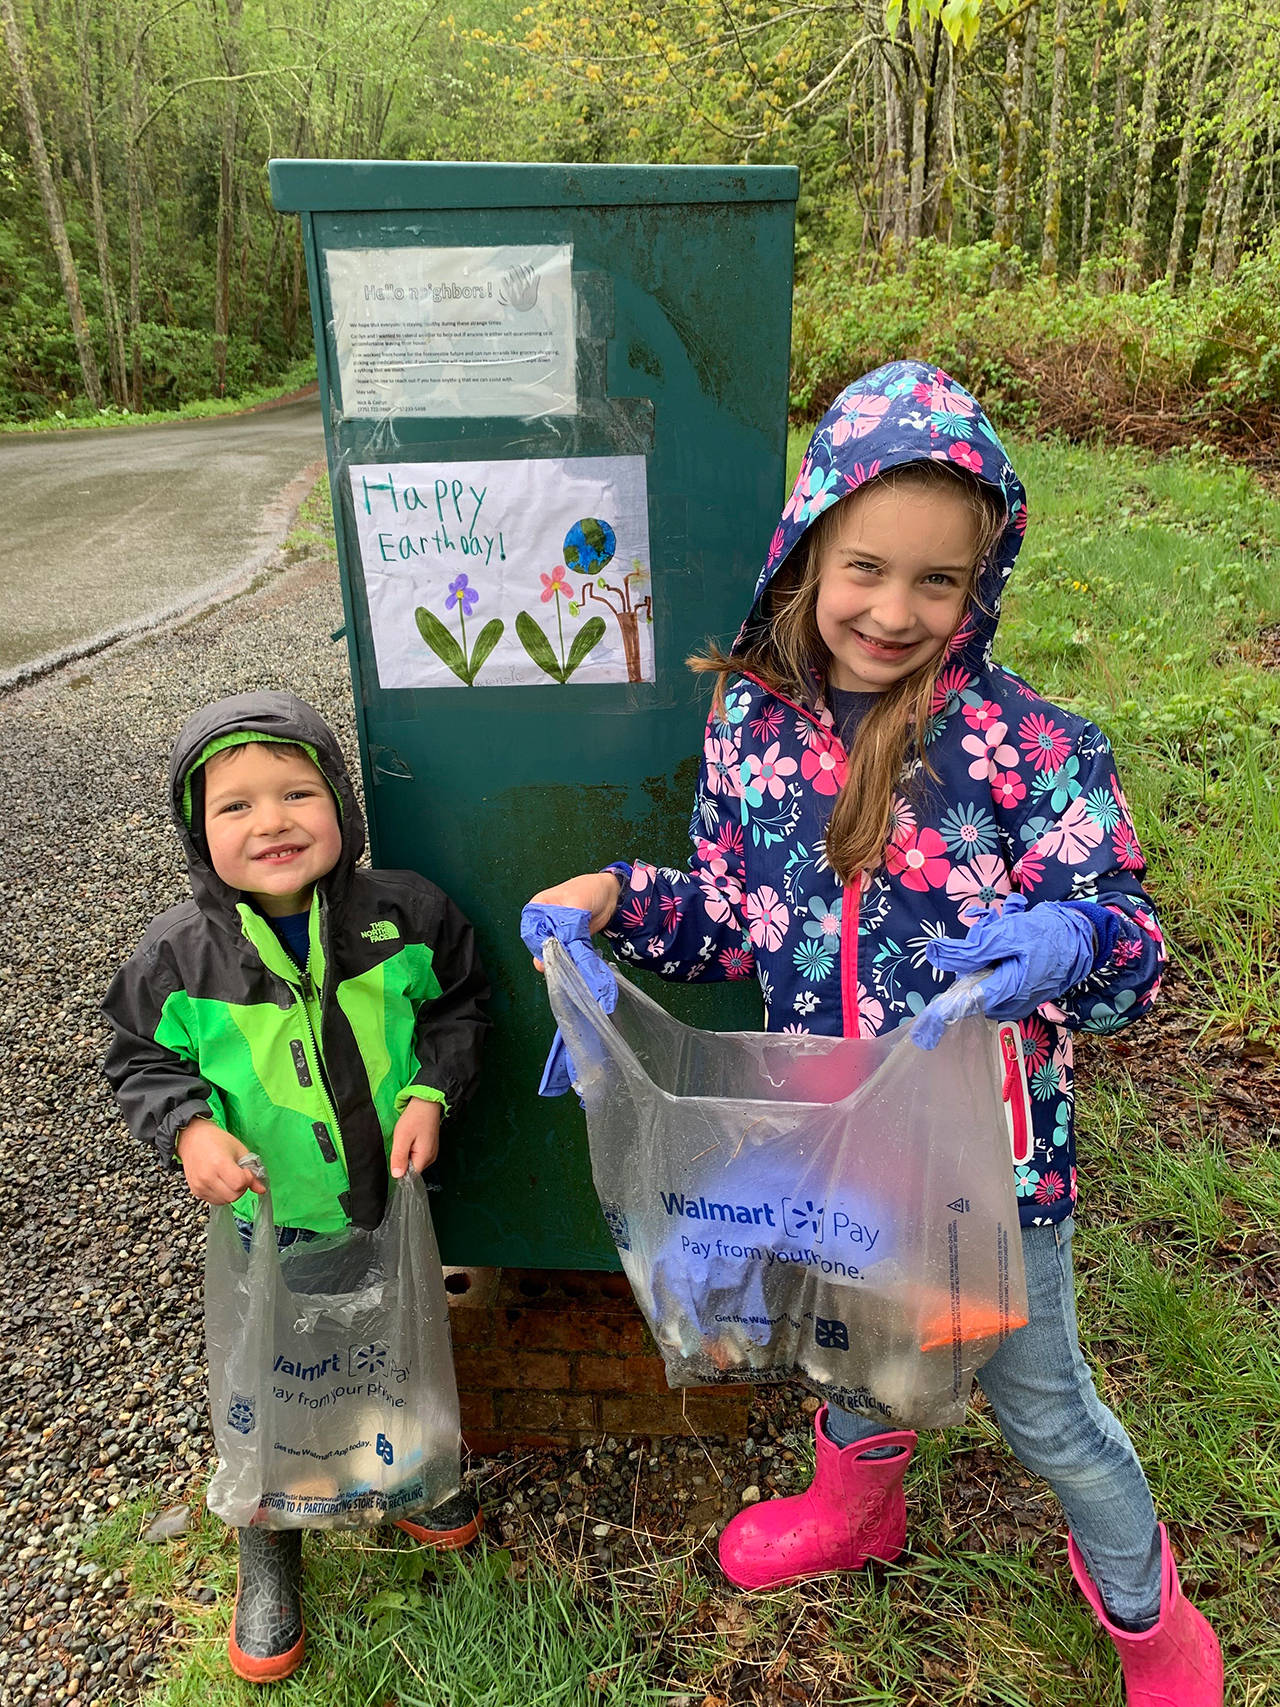 Rain did not stop trash collectors McKenzie Camarena, 6, and brother Corben, 4, during the pair’s celebration of Earth Day. Though students are learning at home due to the COVID-19 school closure, many continued the tradition at The Island School of taking part in environmentally friendly activities on Earth Day. (Photo courtesy of The Island School)